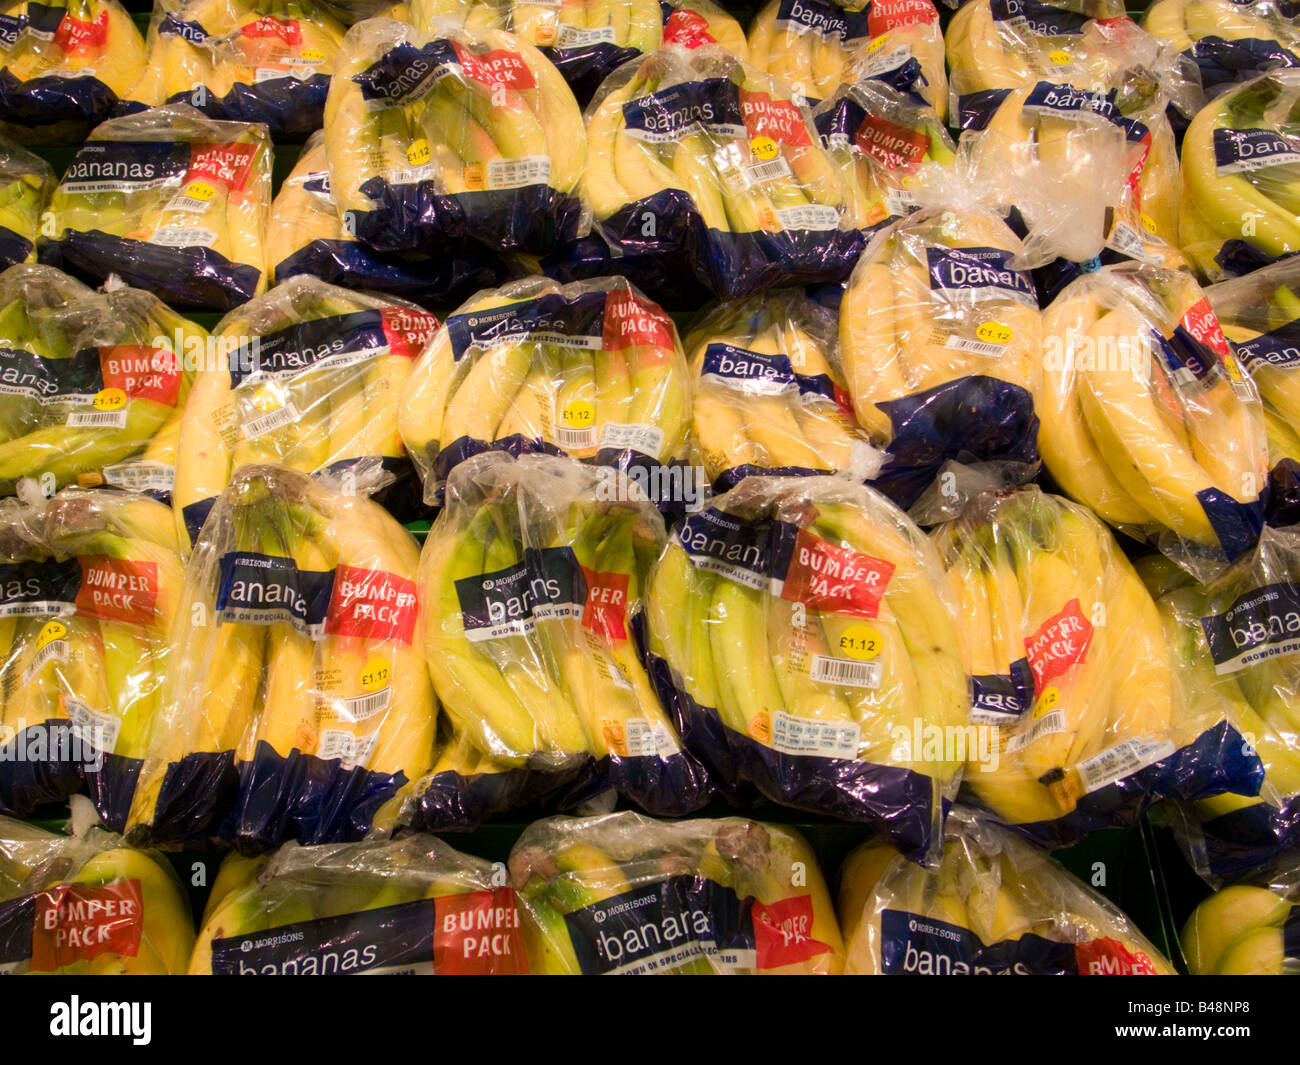 Bananas in clear plastic packaging at Morrisons supermarket, England,UK Stock Photo